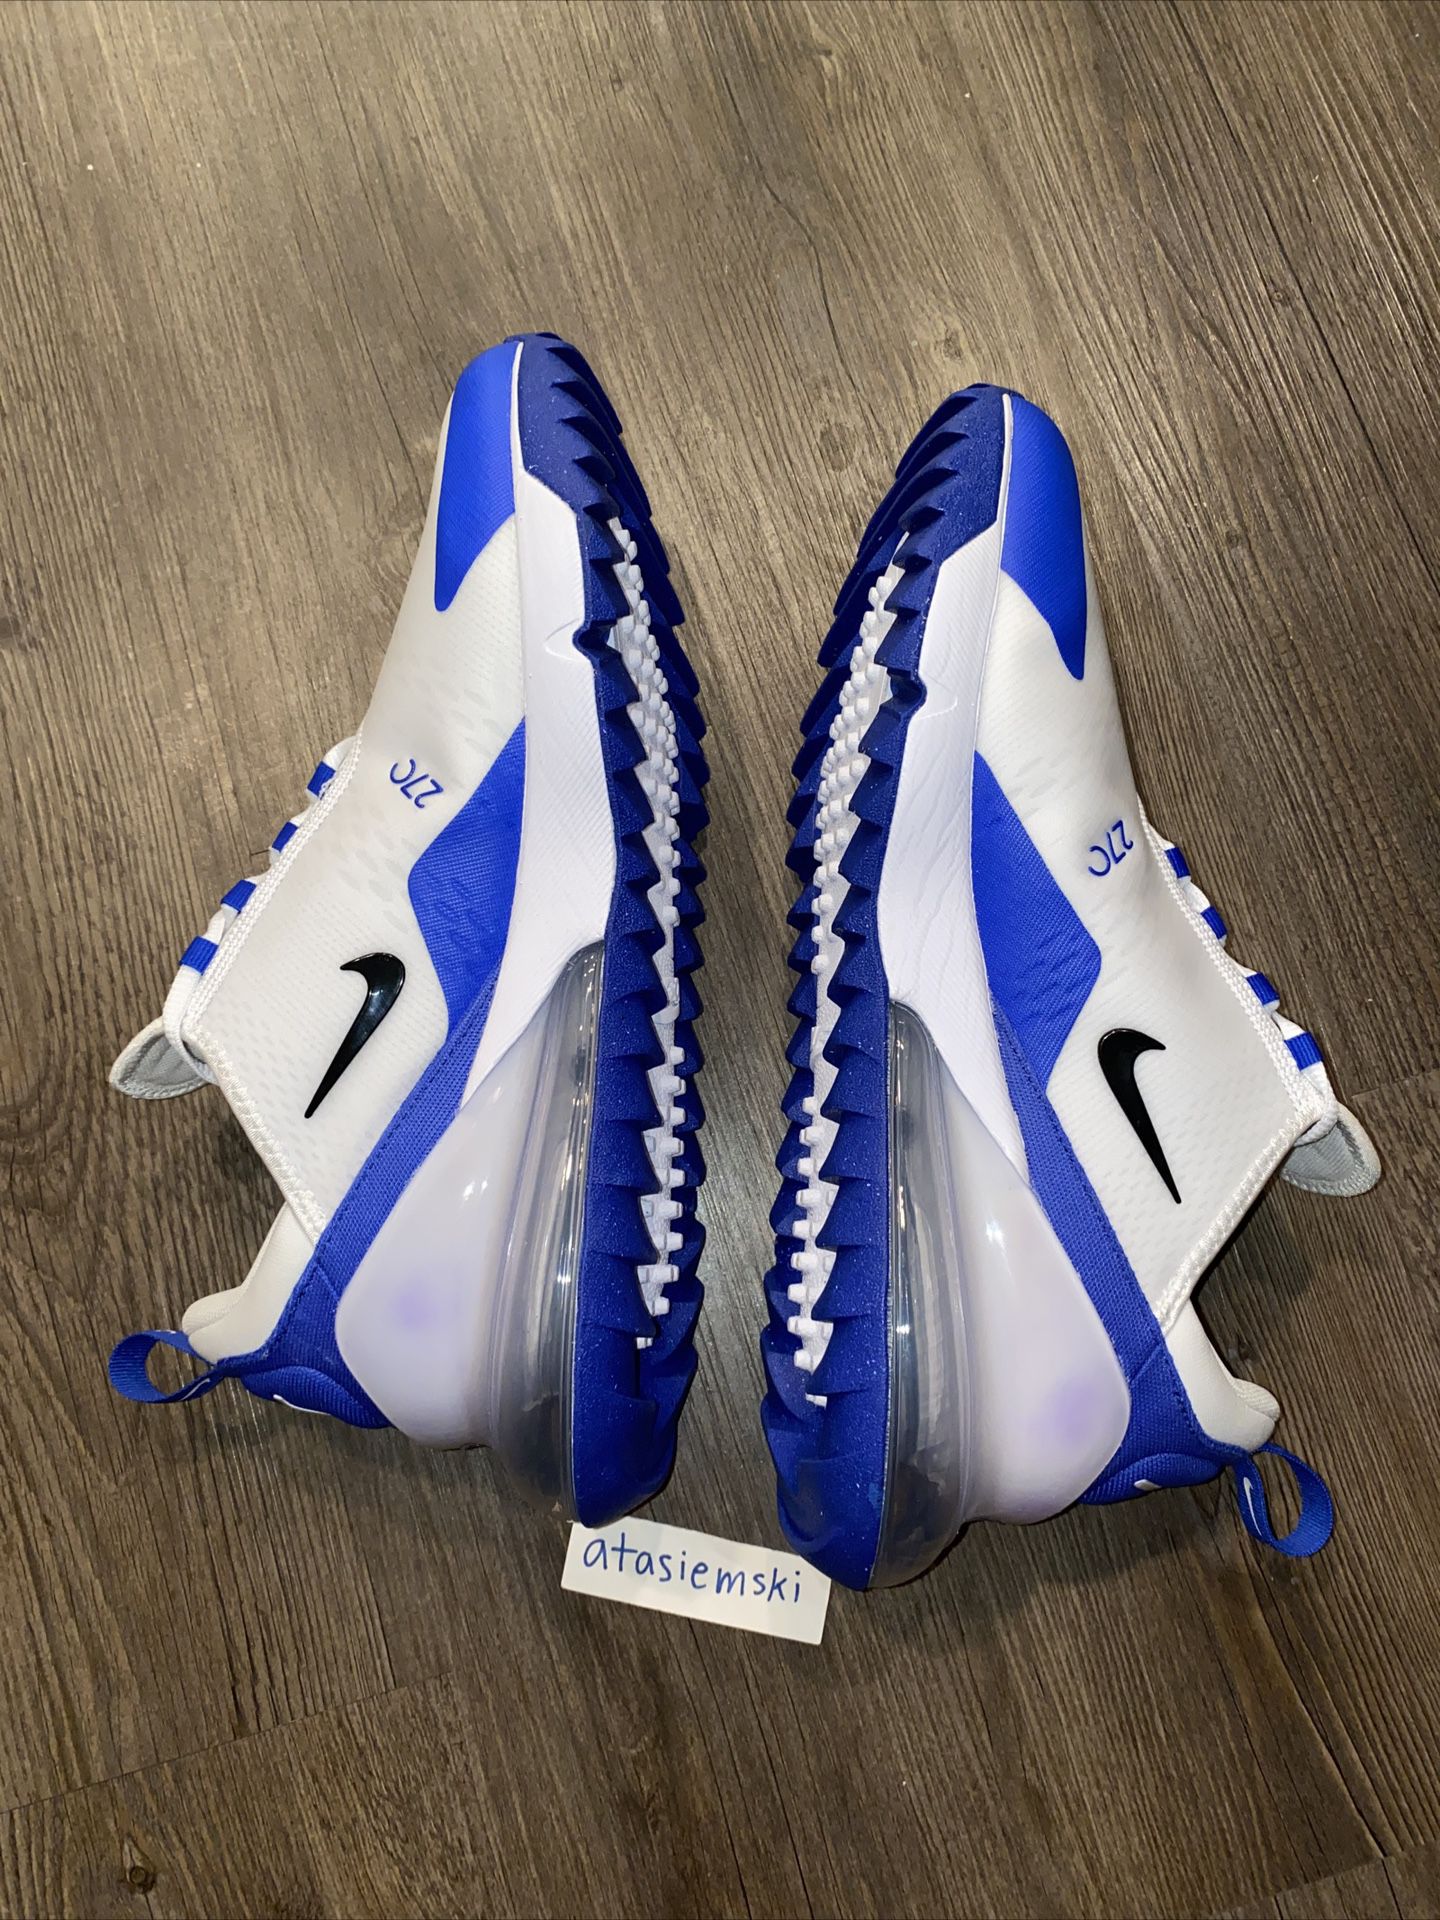 Nike Air Max 270 for Sale in Phoenix, AZ - OfferUp